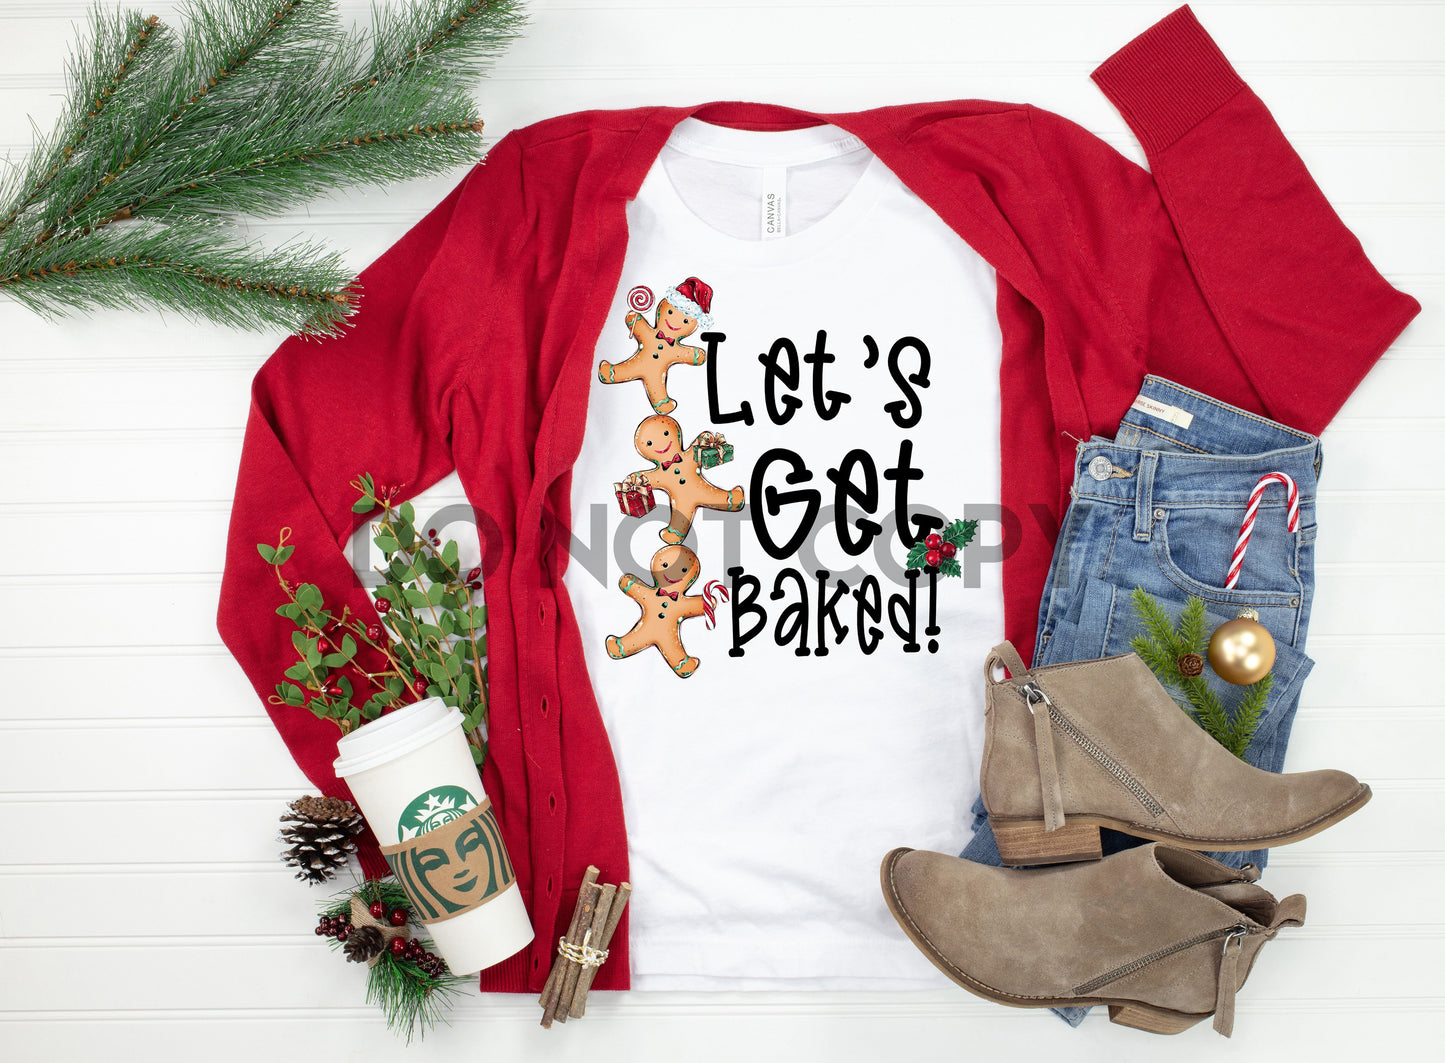 Let's get baked gingerbread Christmas cookies sublimation print